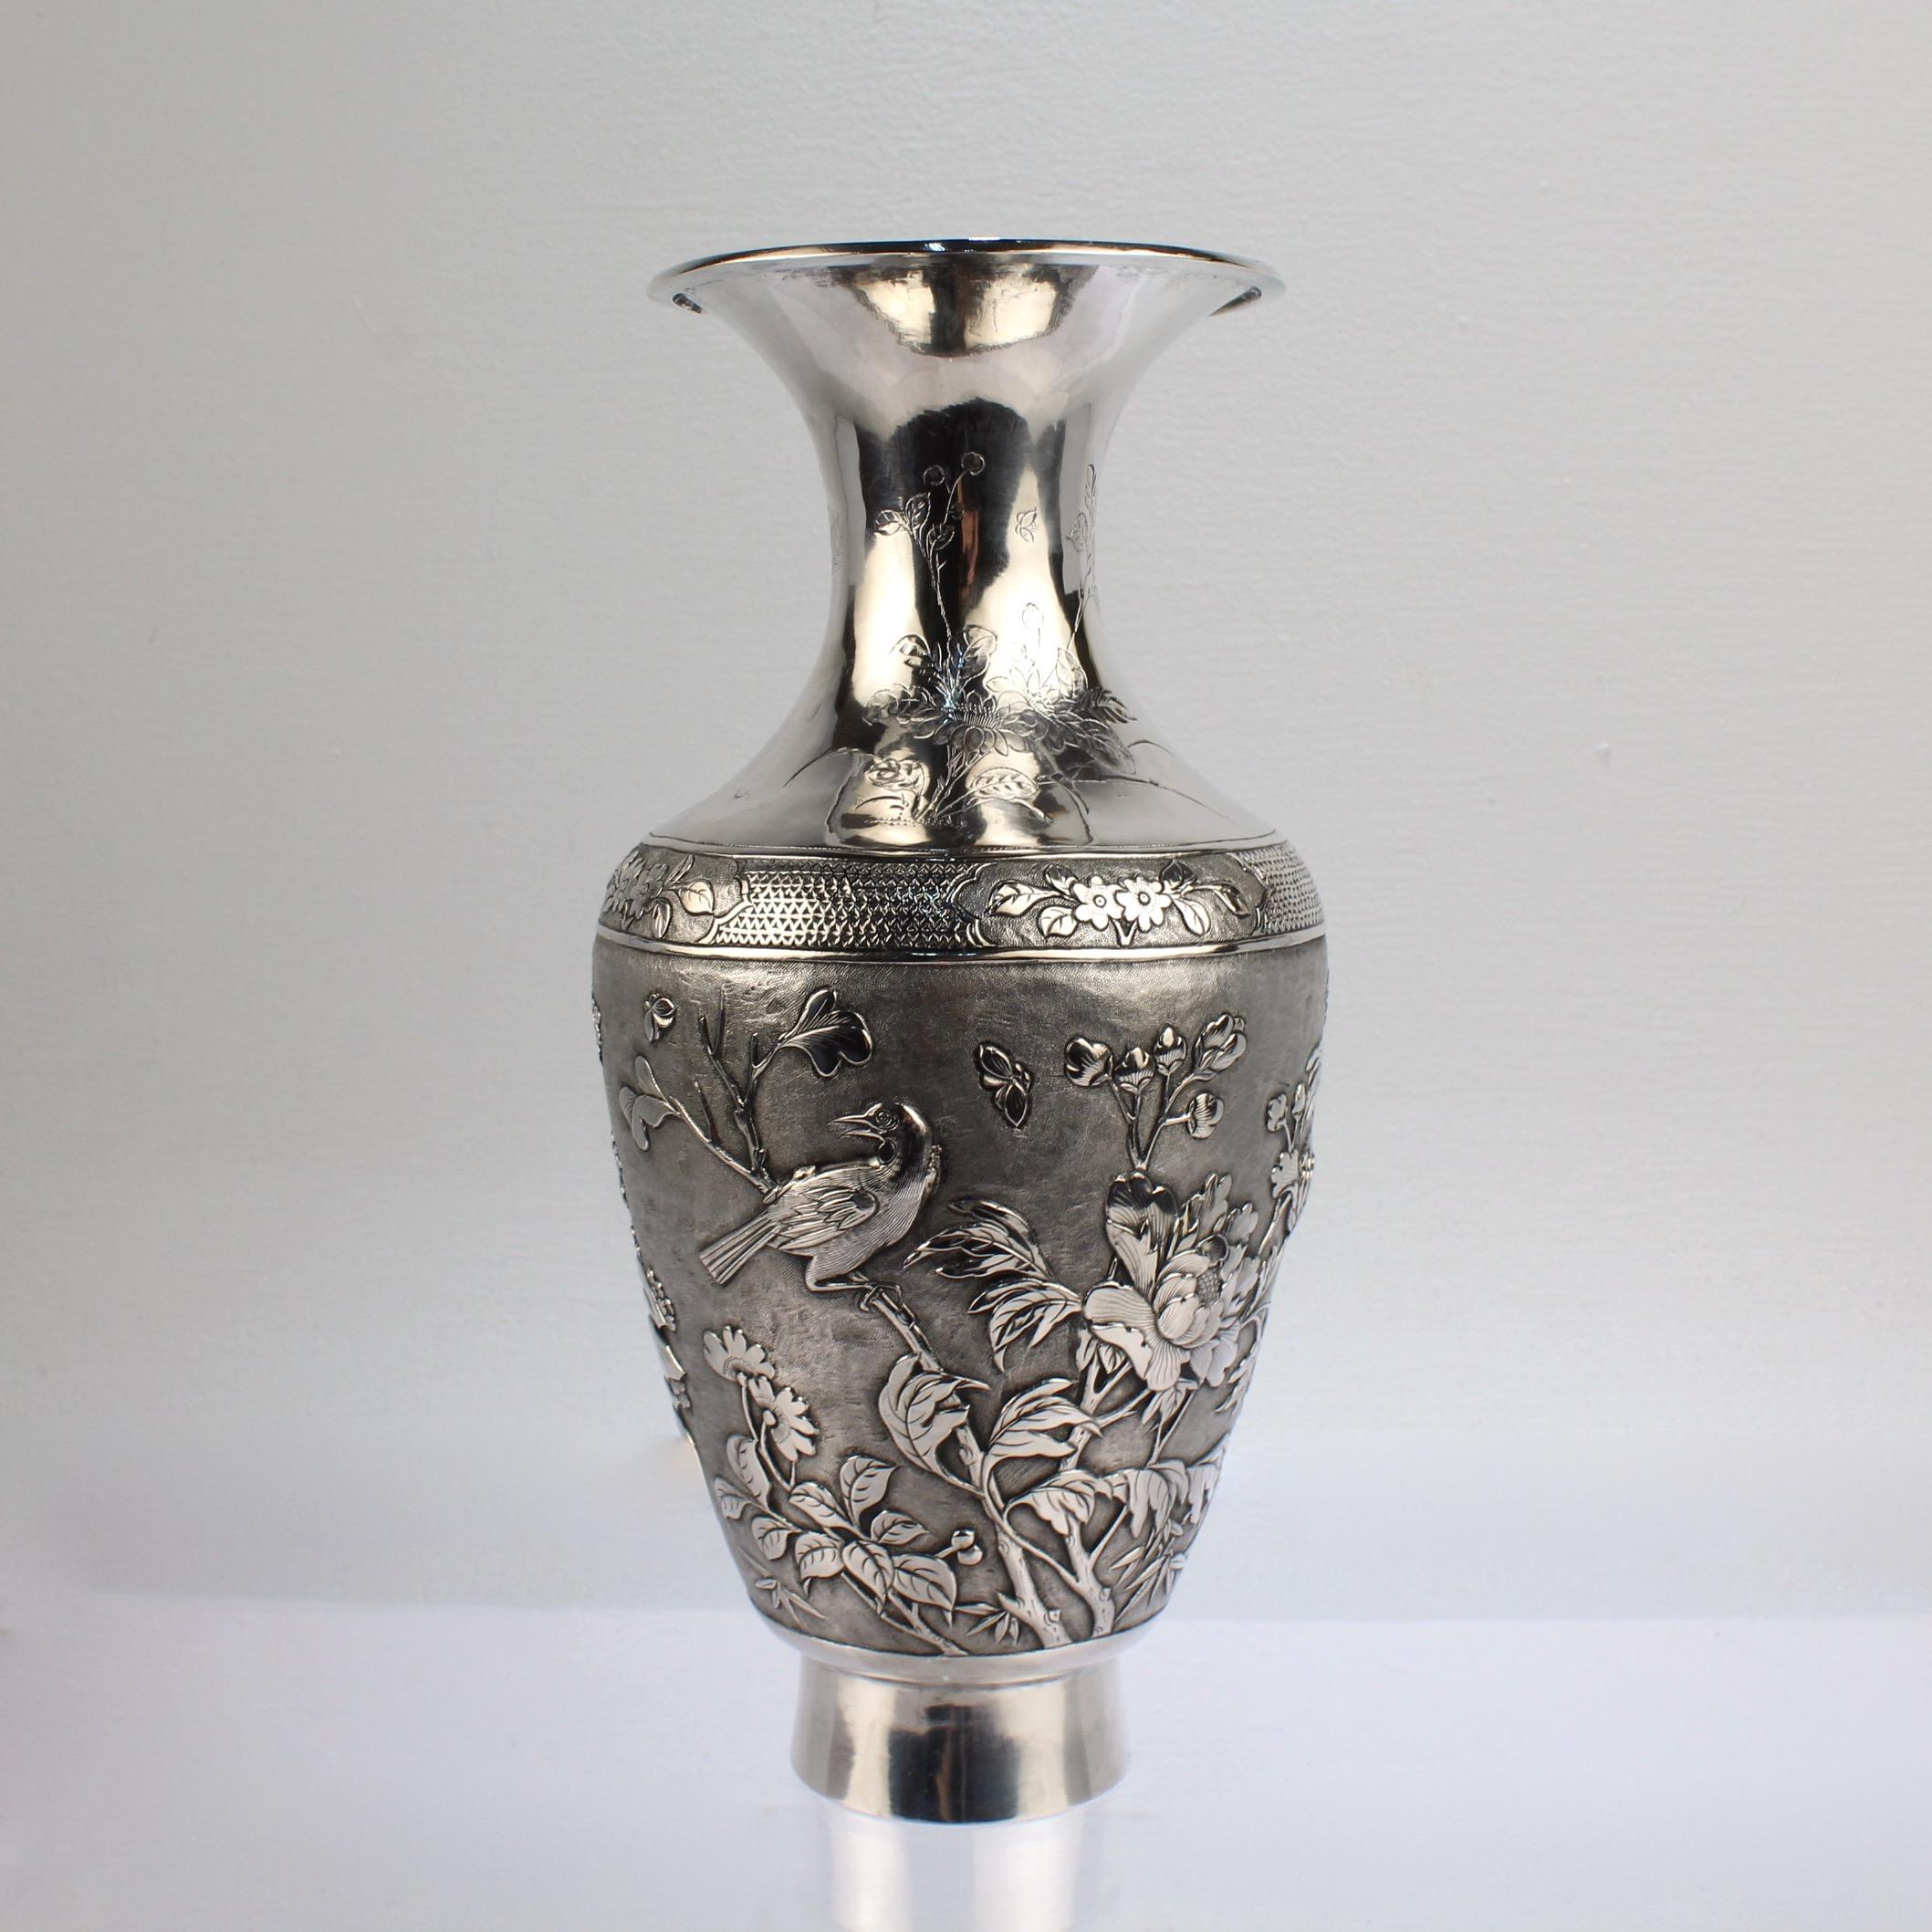 A fine antique Chinese Export solid silver vase.

With raised repoussé figures, foliage and clouds as well as engraved decoration.

Signed to the base with Chinese characters (possibly for Hongyu and Shanghai).

Simply a fantastic Chinese silver